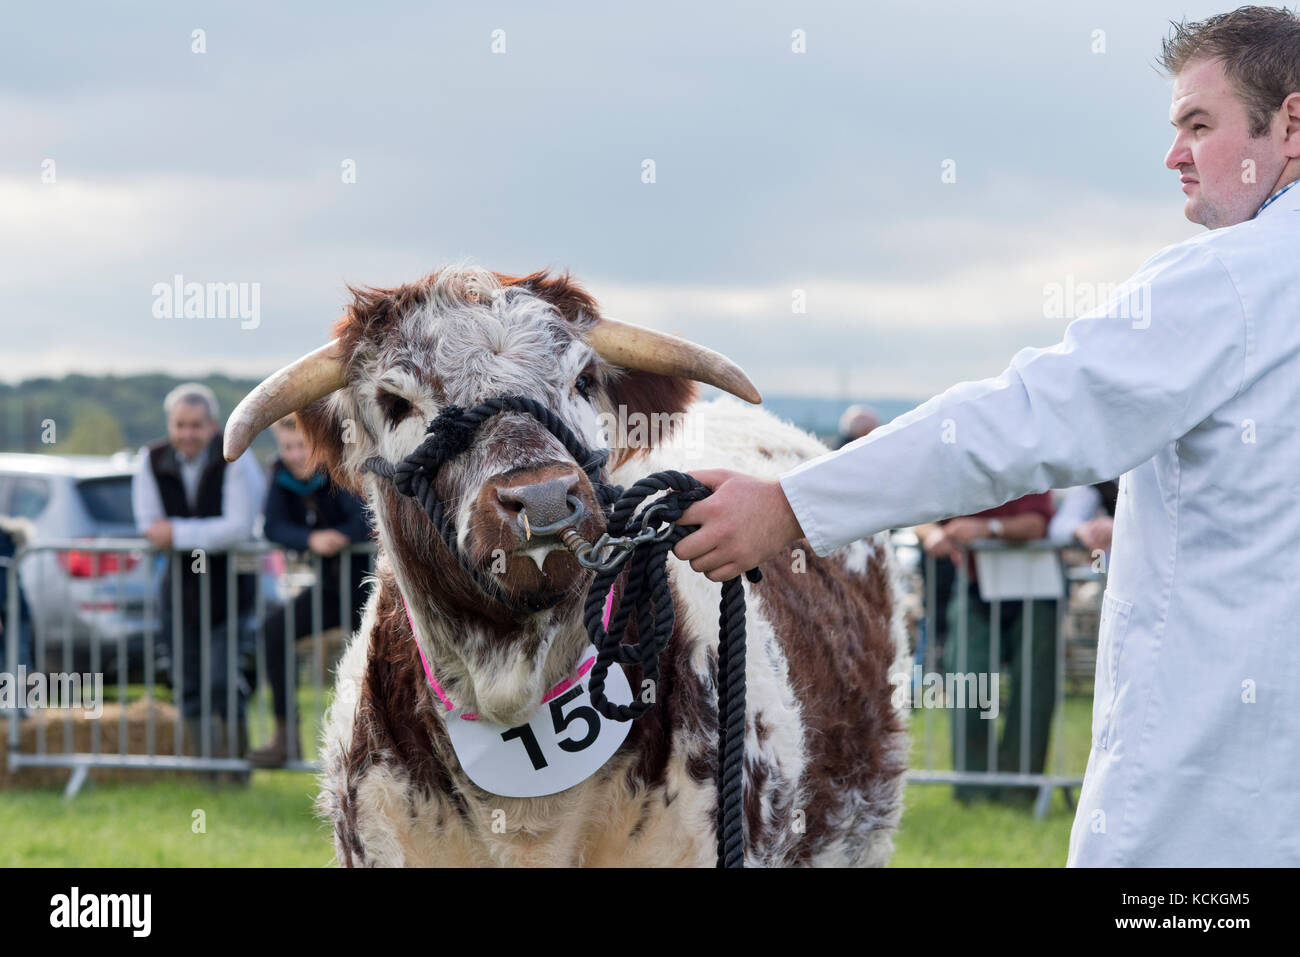 Bos primigenius. Inglese Longhorn bull in mostra a mostrare Flintham, Nottinghamshire, Inghilterra Foto Stock